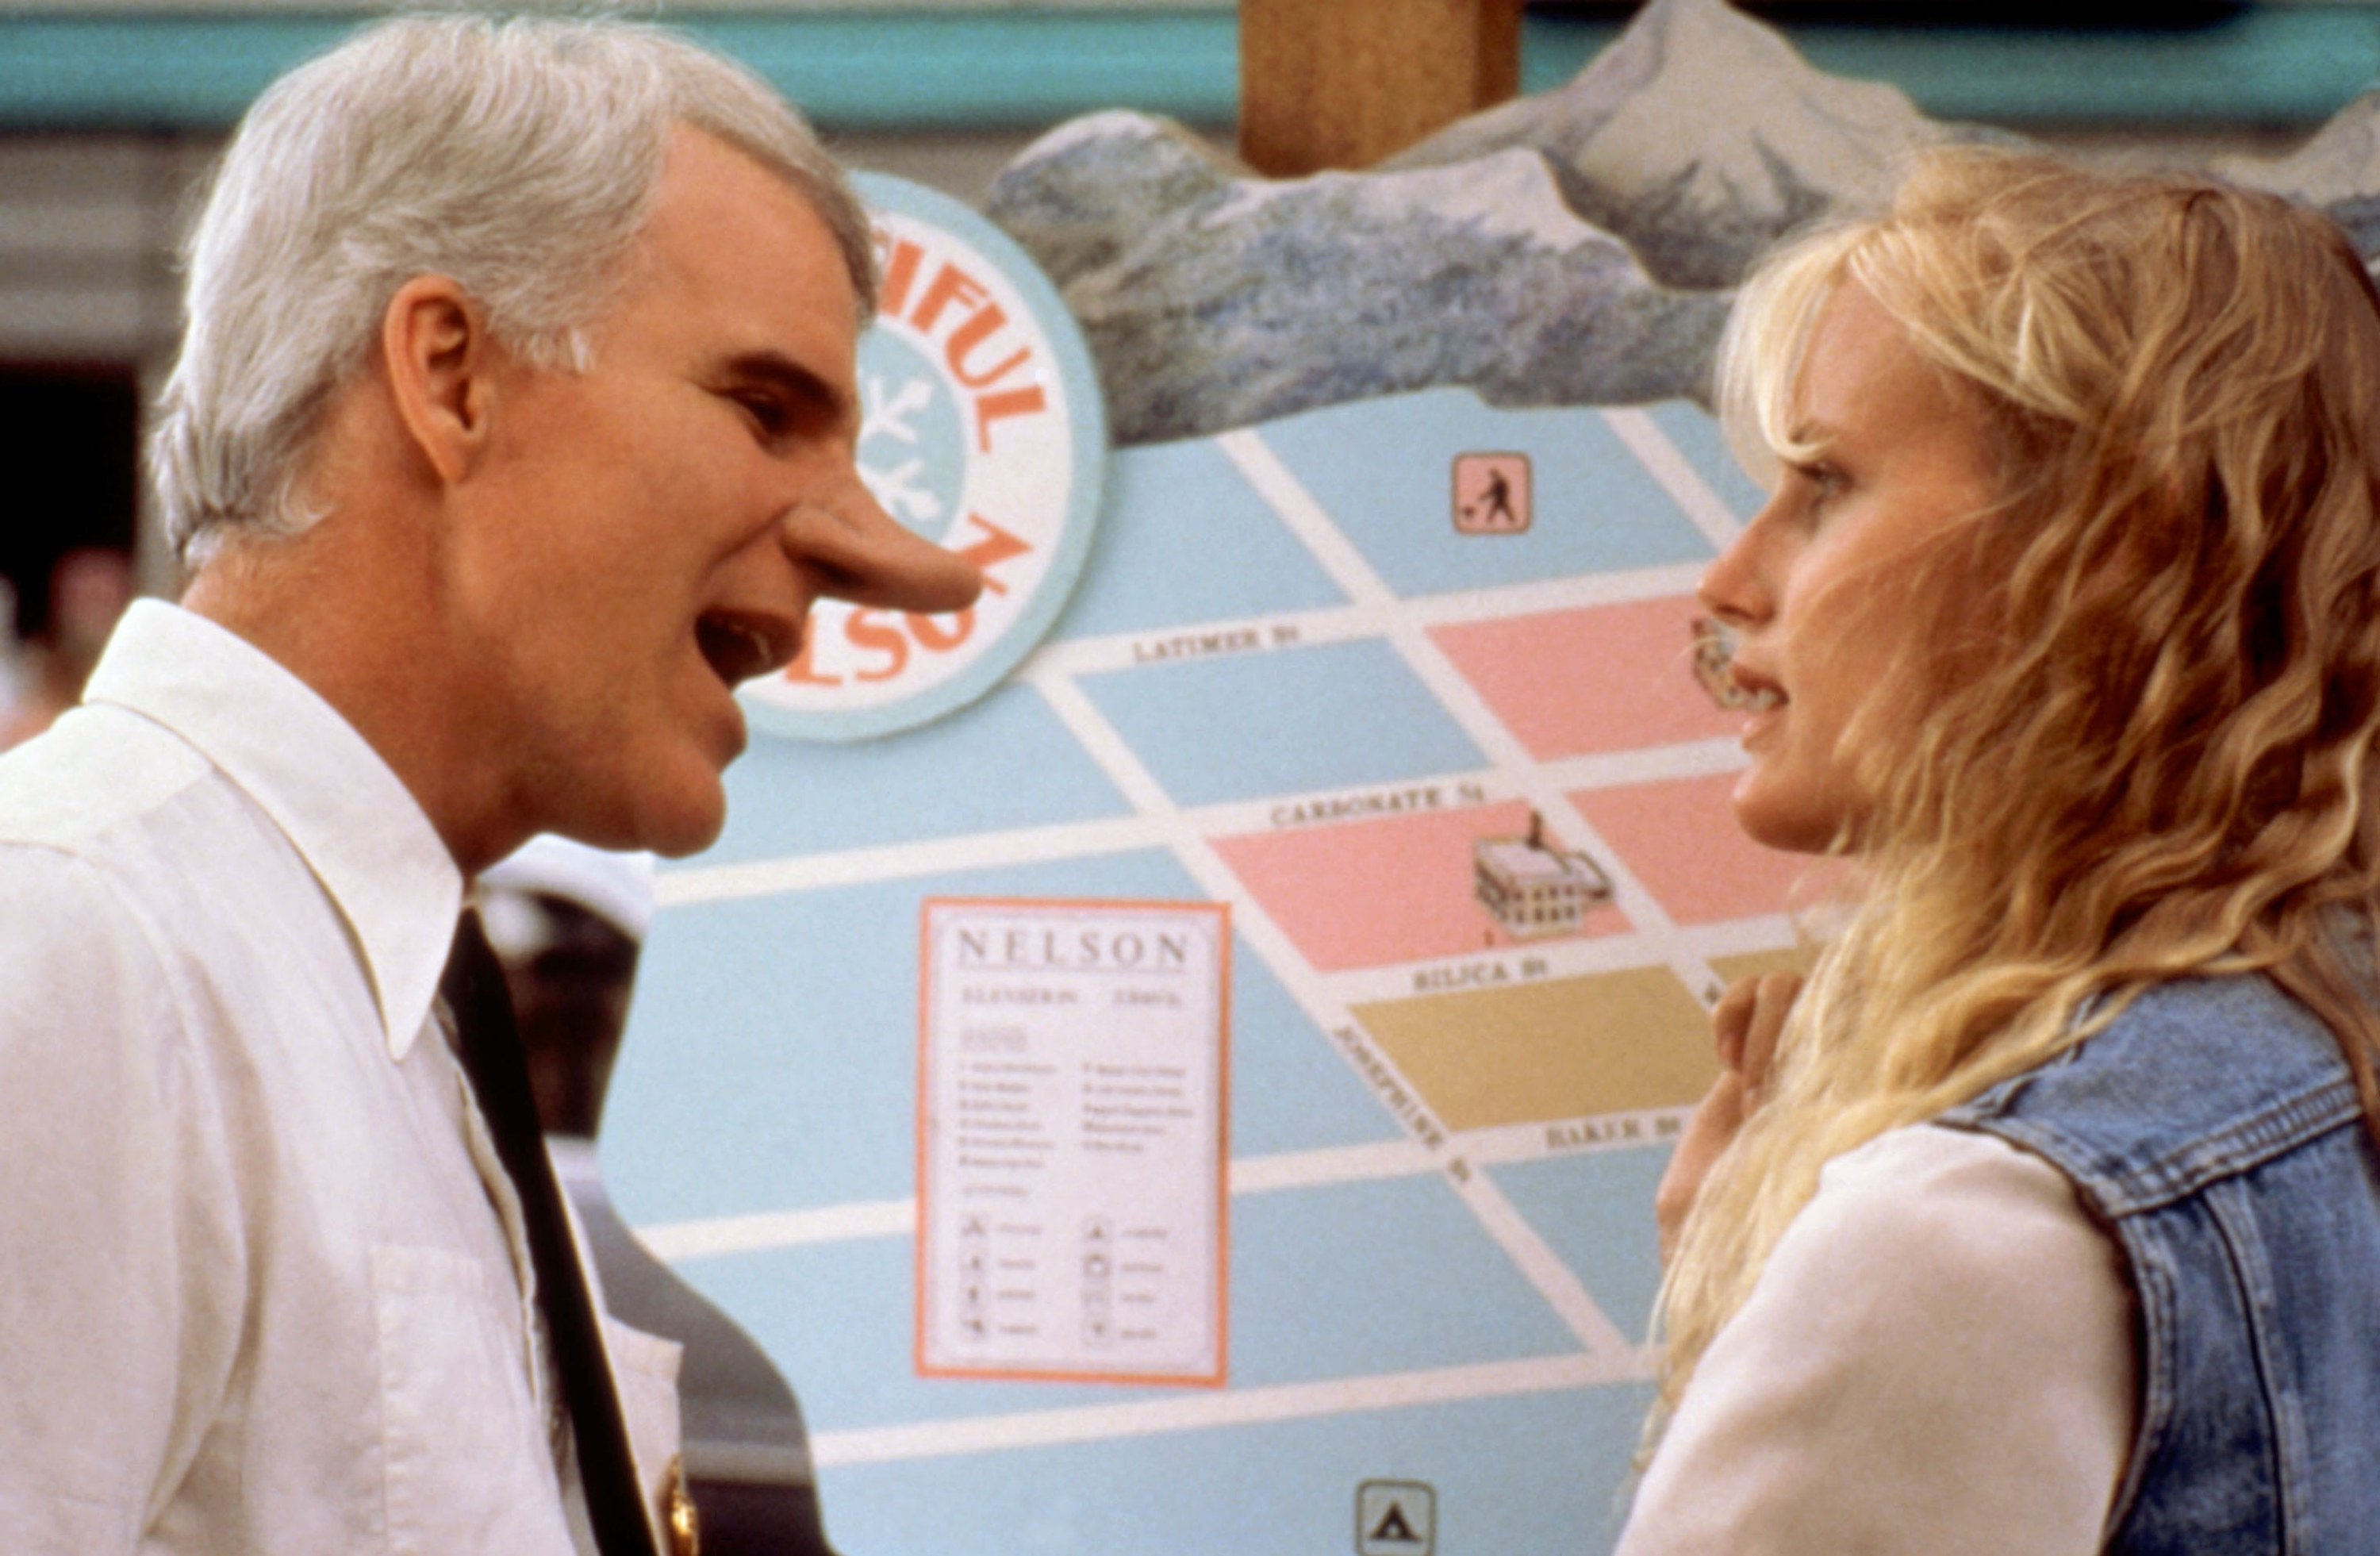 Steve Martin with a large nose screaming at a woman